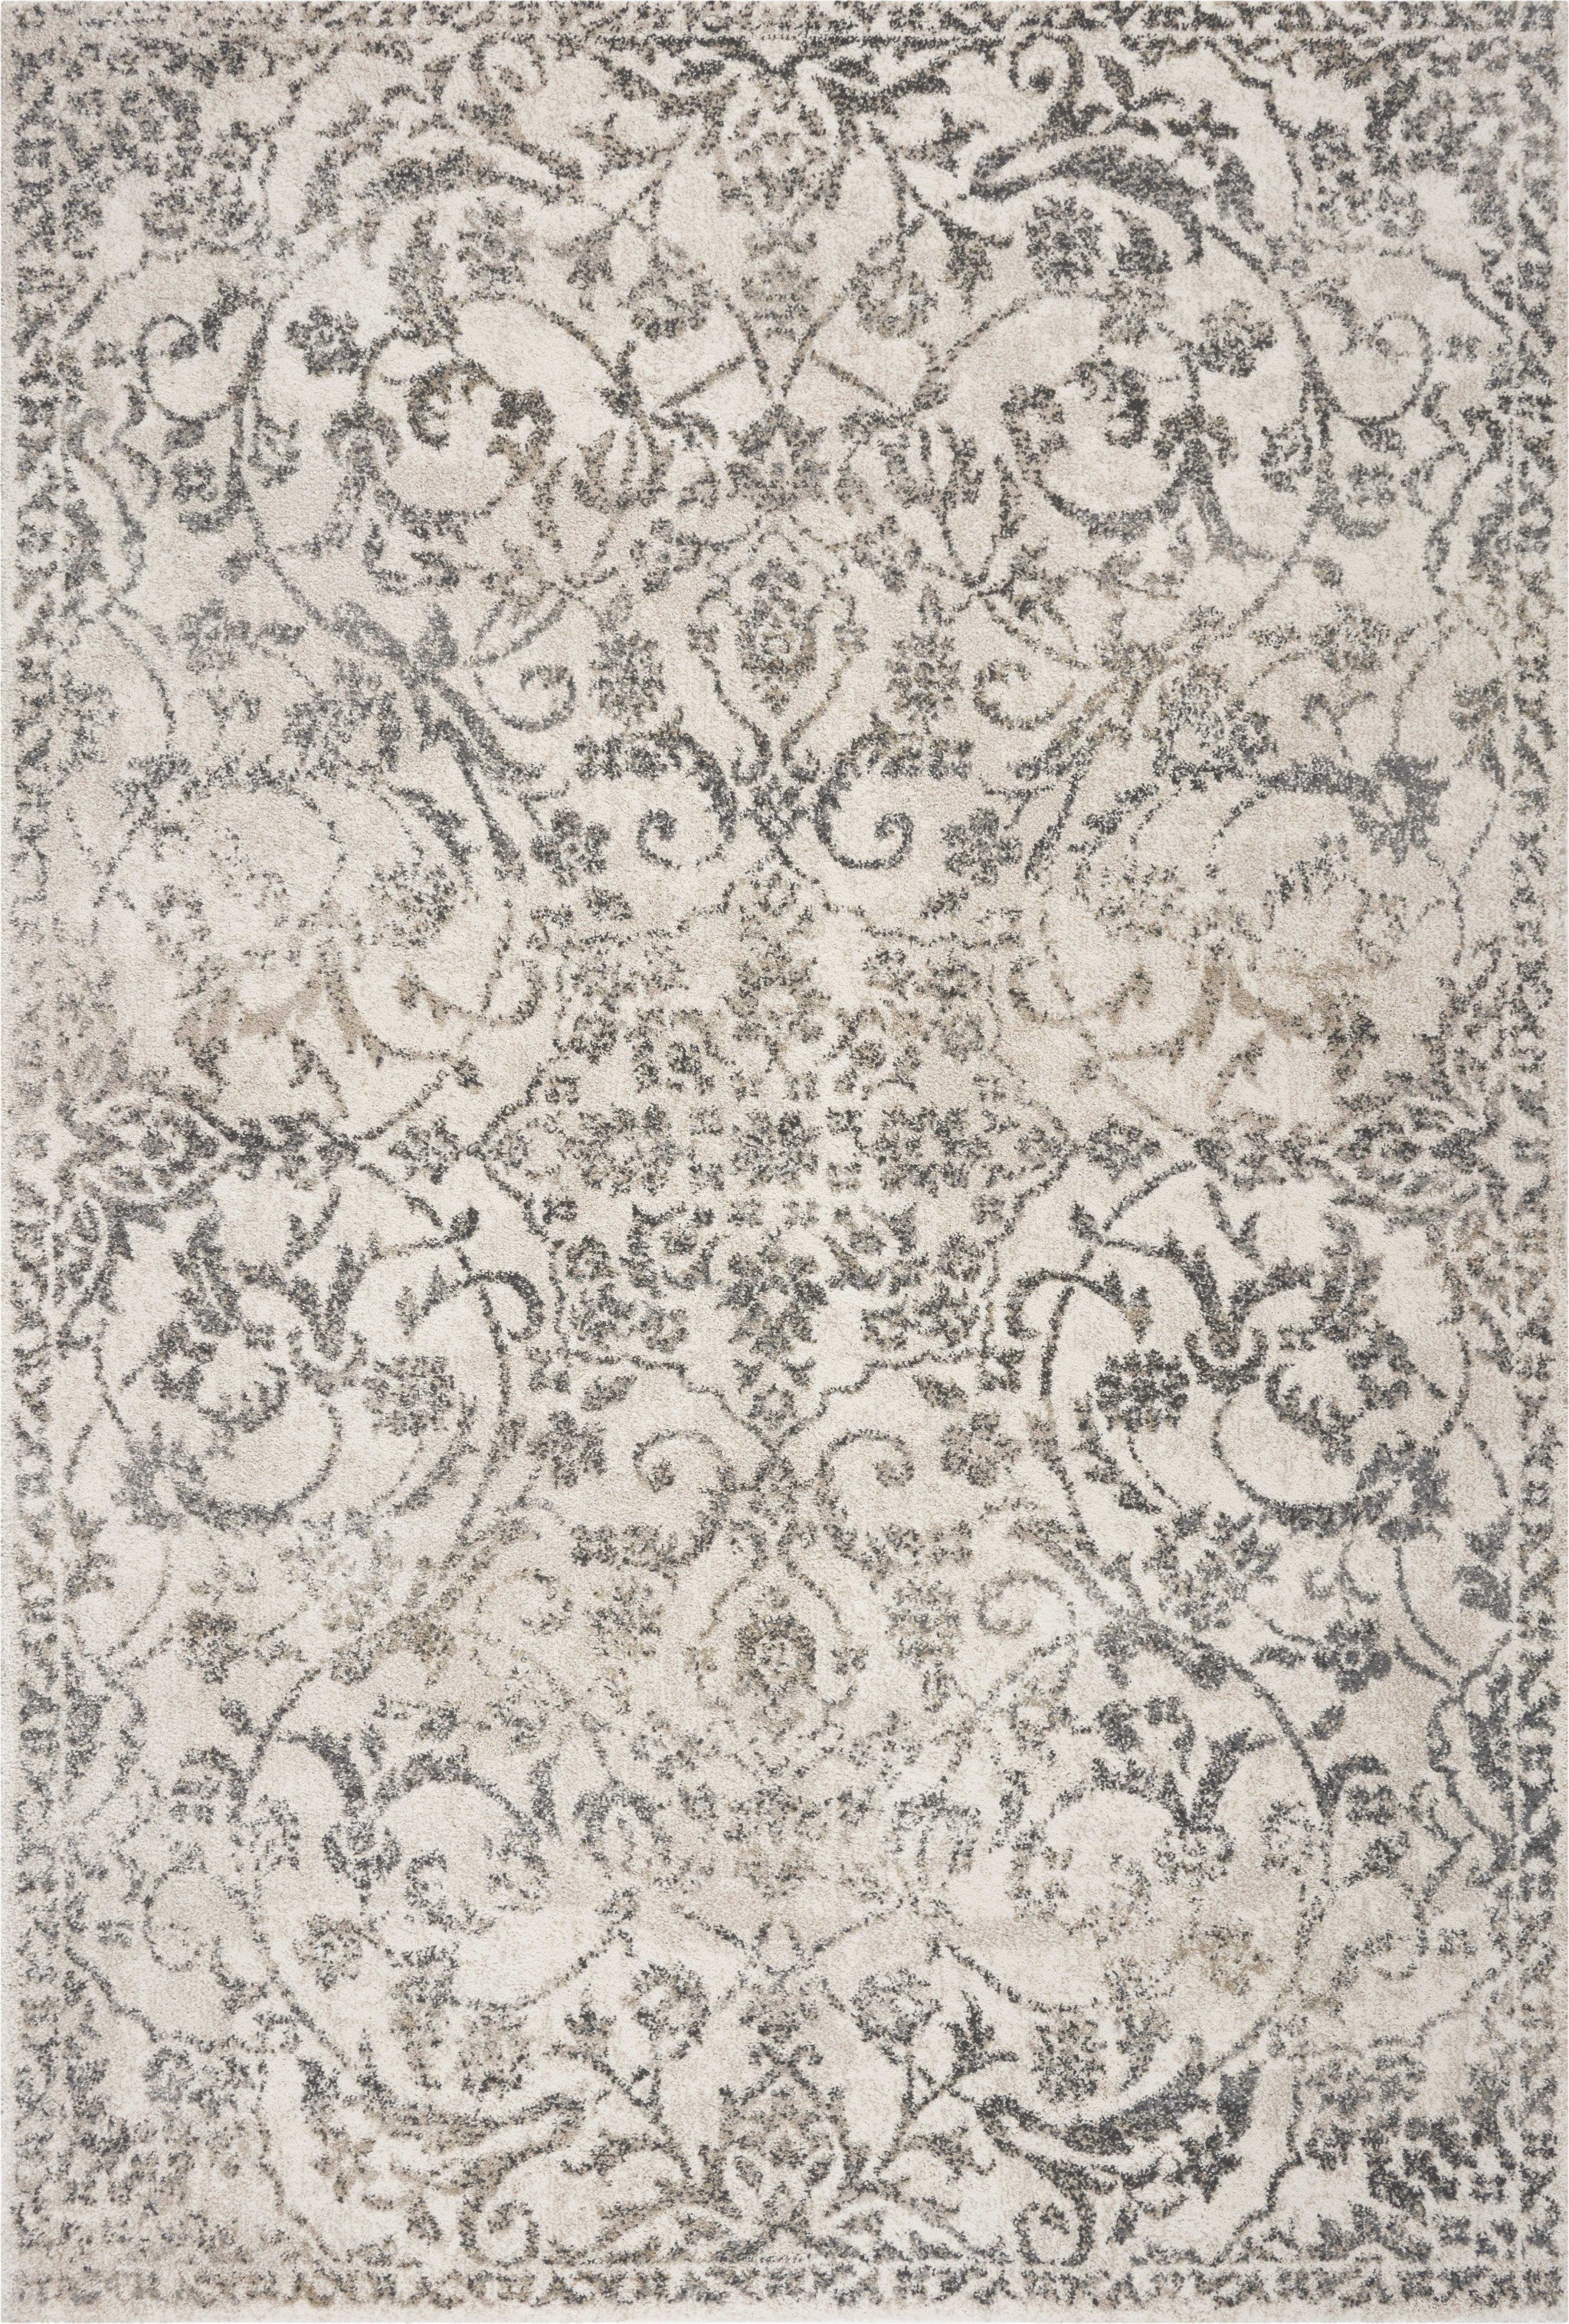 8' x 10' Ivory and Gray Floral Vines Distressed Area Rug